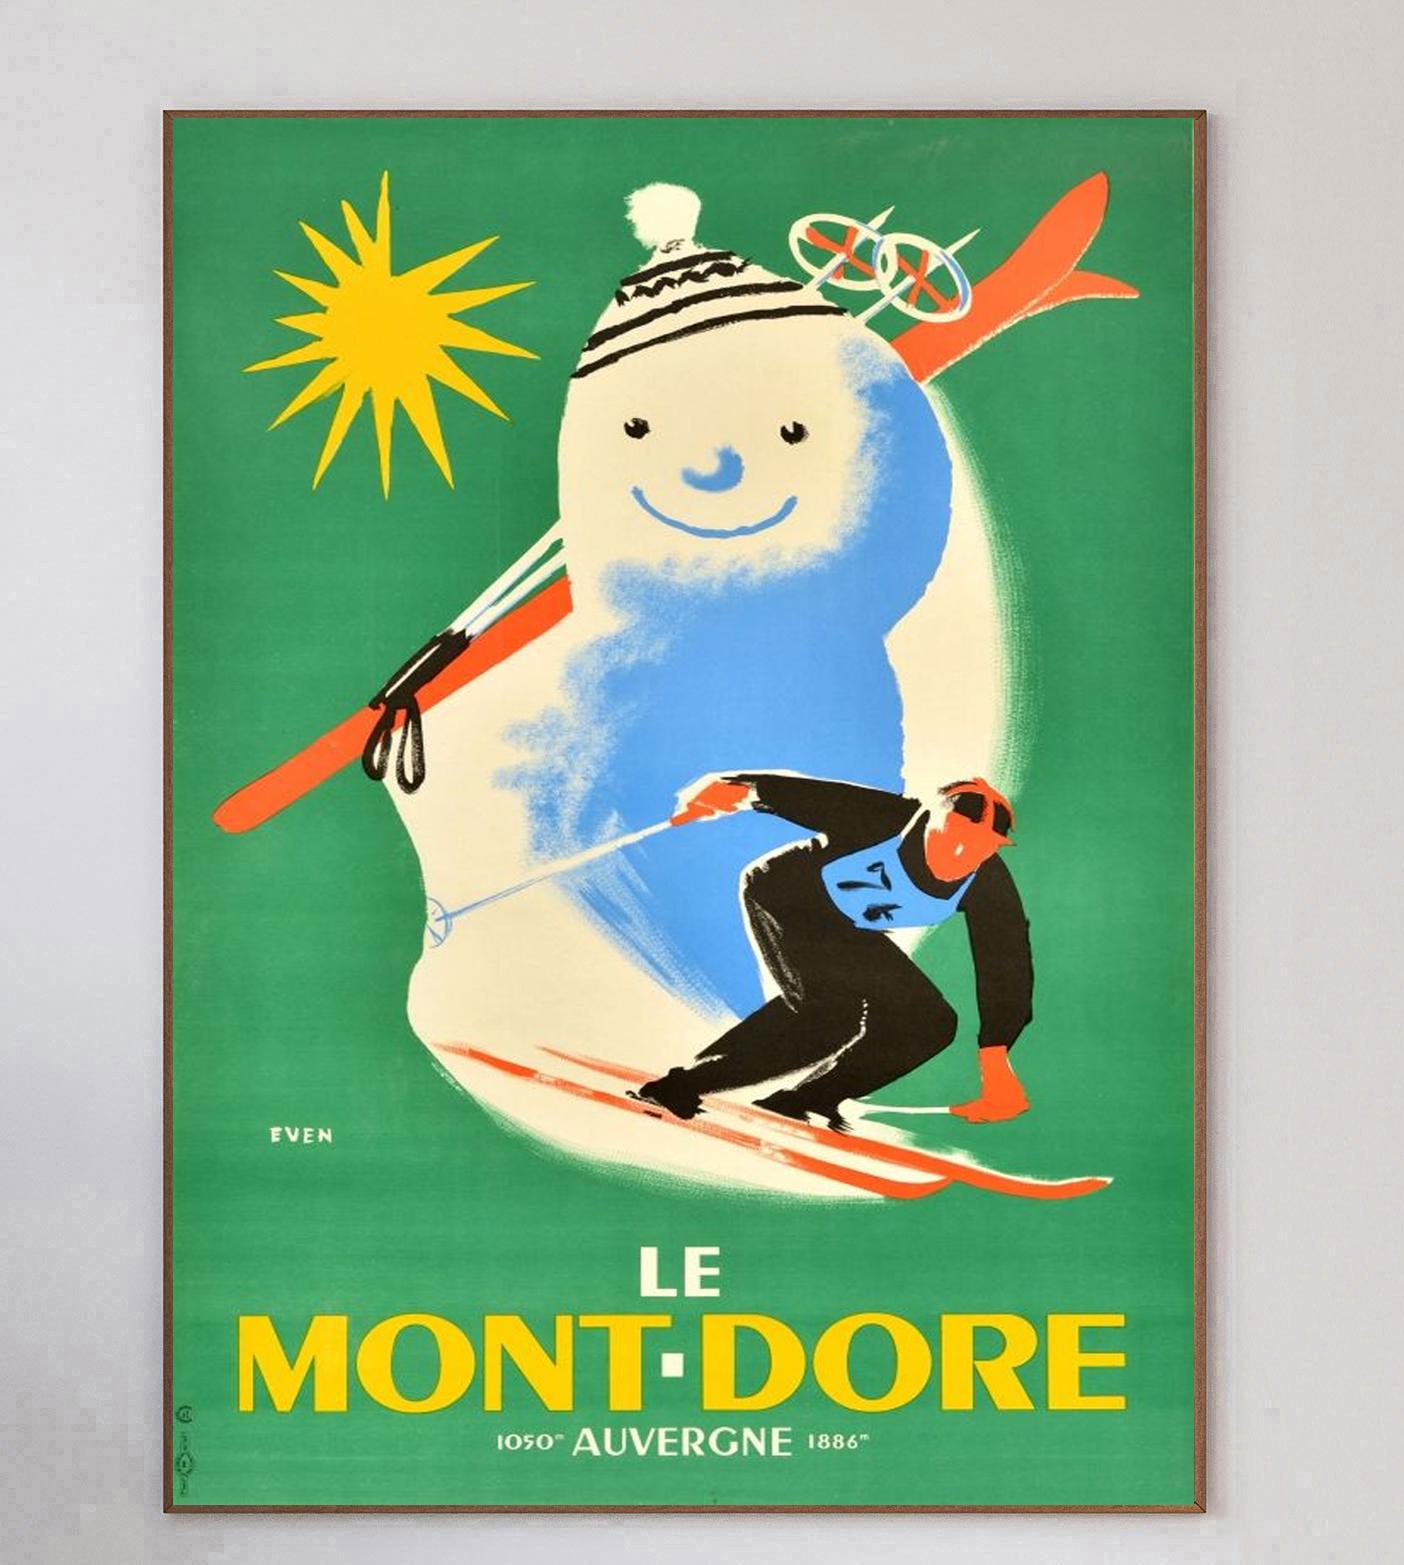 With stunning artwork from Jean Even, this poster was created in 1940 to advertise the Le Monte-Dore area in Auvergne-Rhone-Alpes in central France.

The gorgeous design depicts a man skiing down the slopes with a skier snowman in the beautiful